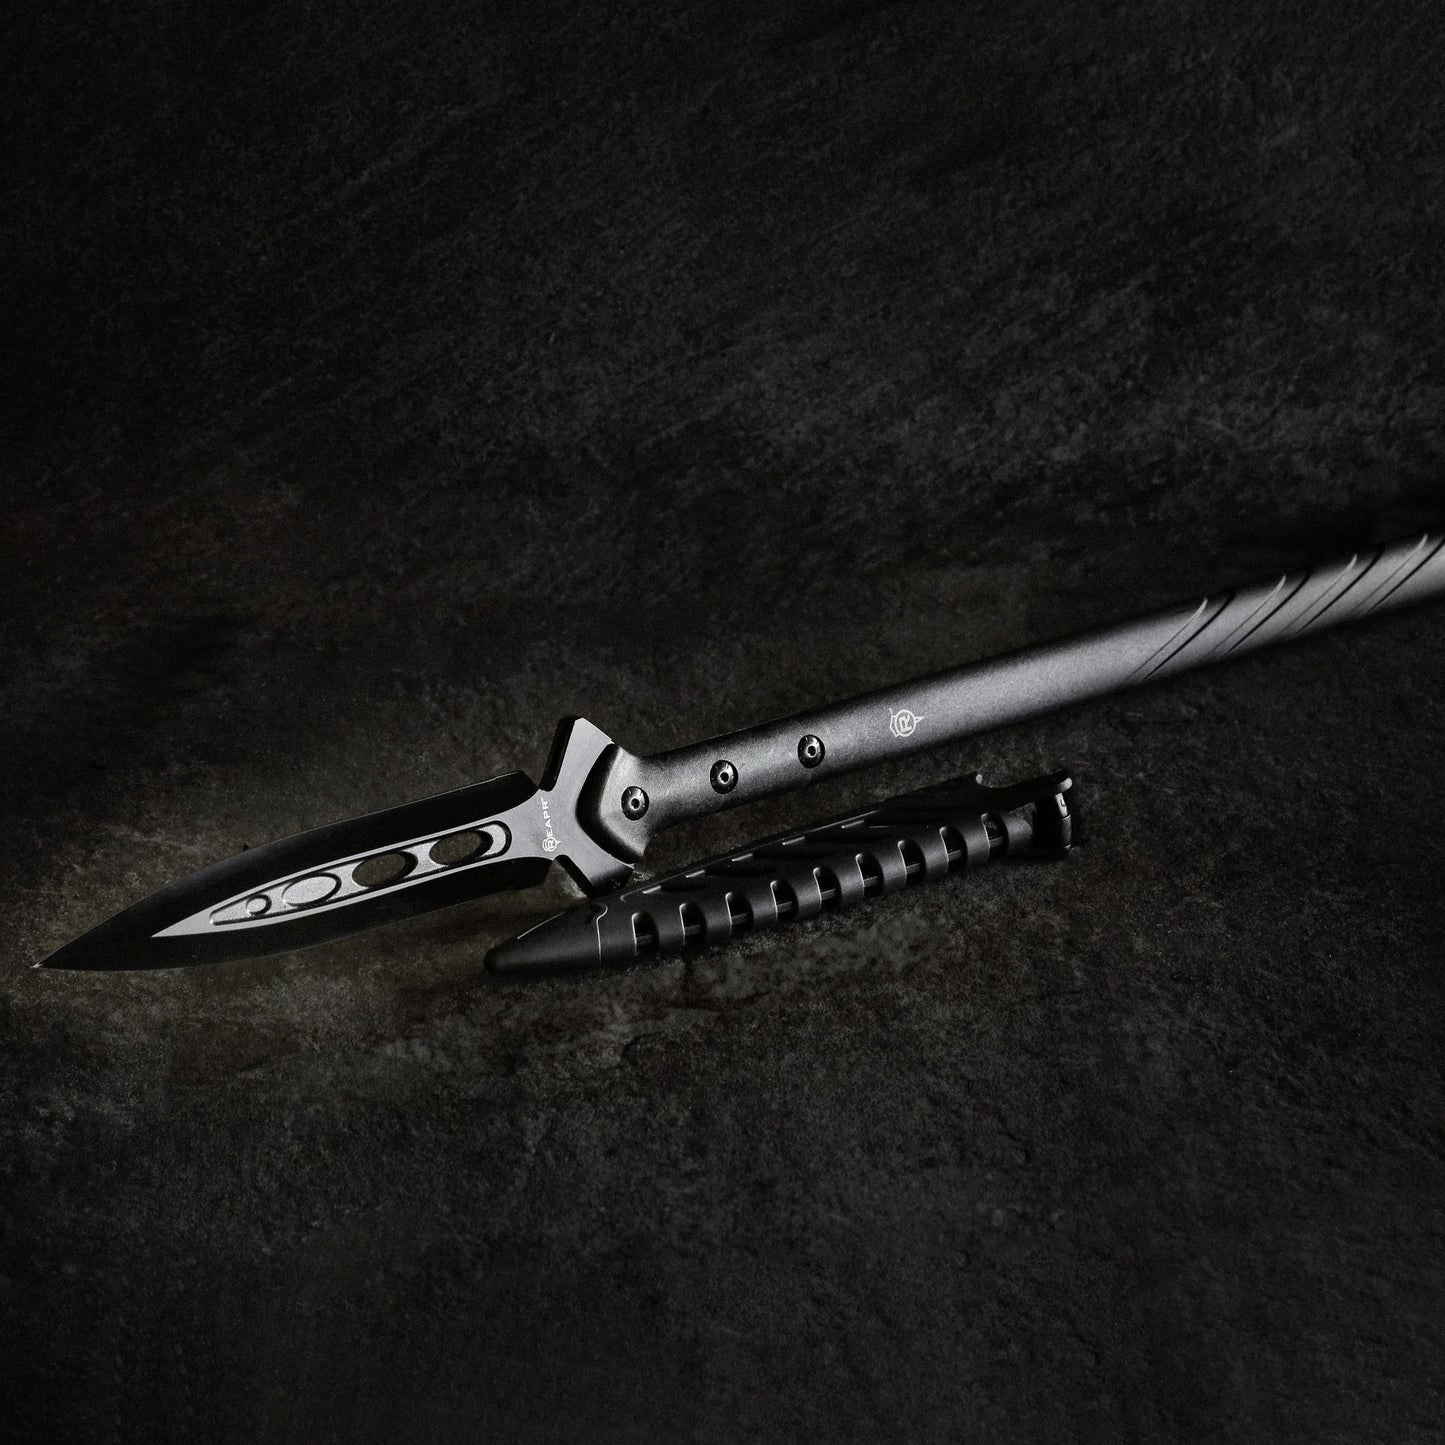 Designed for piercing, prying, impaling and breaching, the REAPR 11003 Survival Spear is ideal for hunting and tactical uses, as well as general protection. The shaft is shorter than many, making this spear excellent for close quarters survival and hunting. www.defenceqstore.com.au